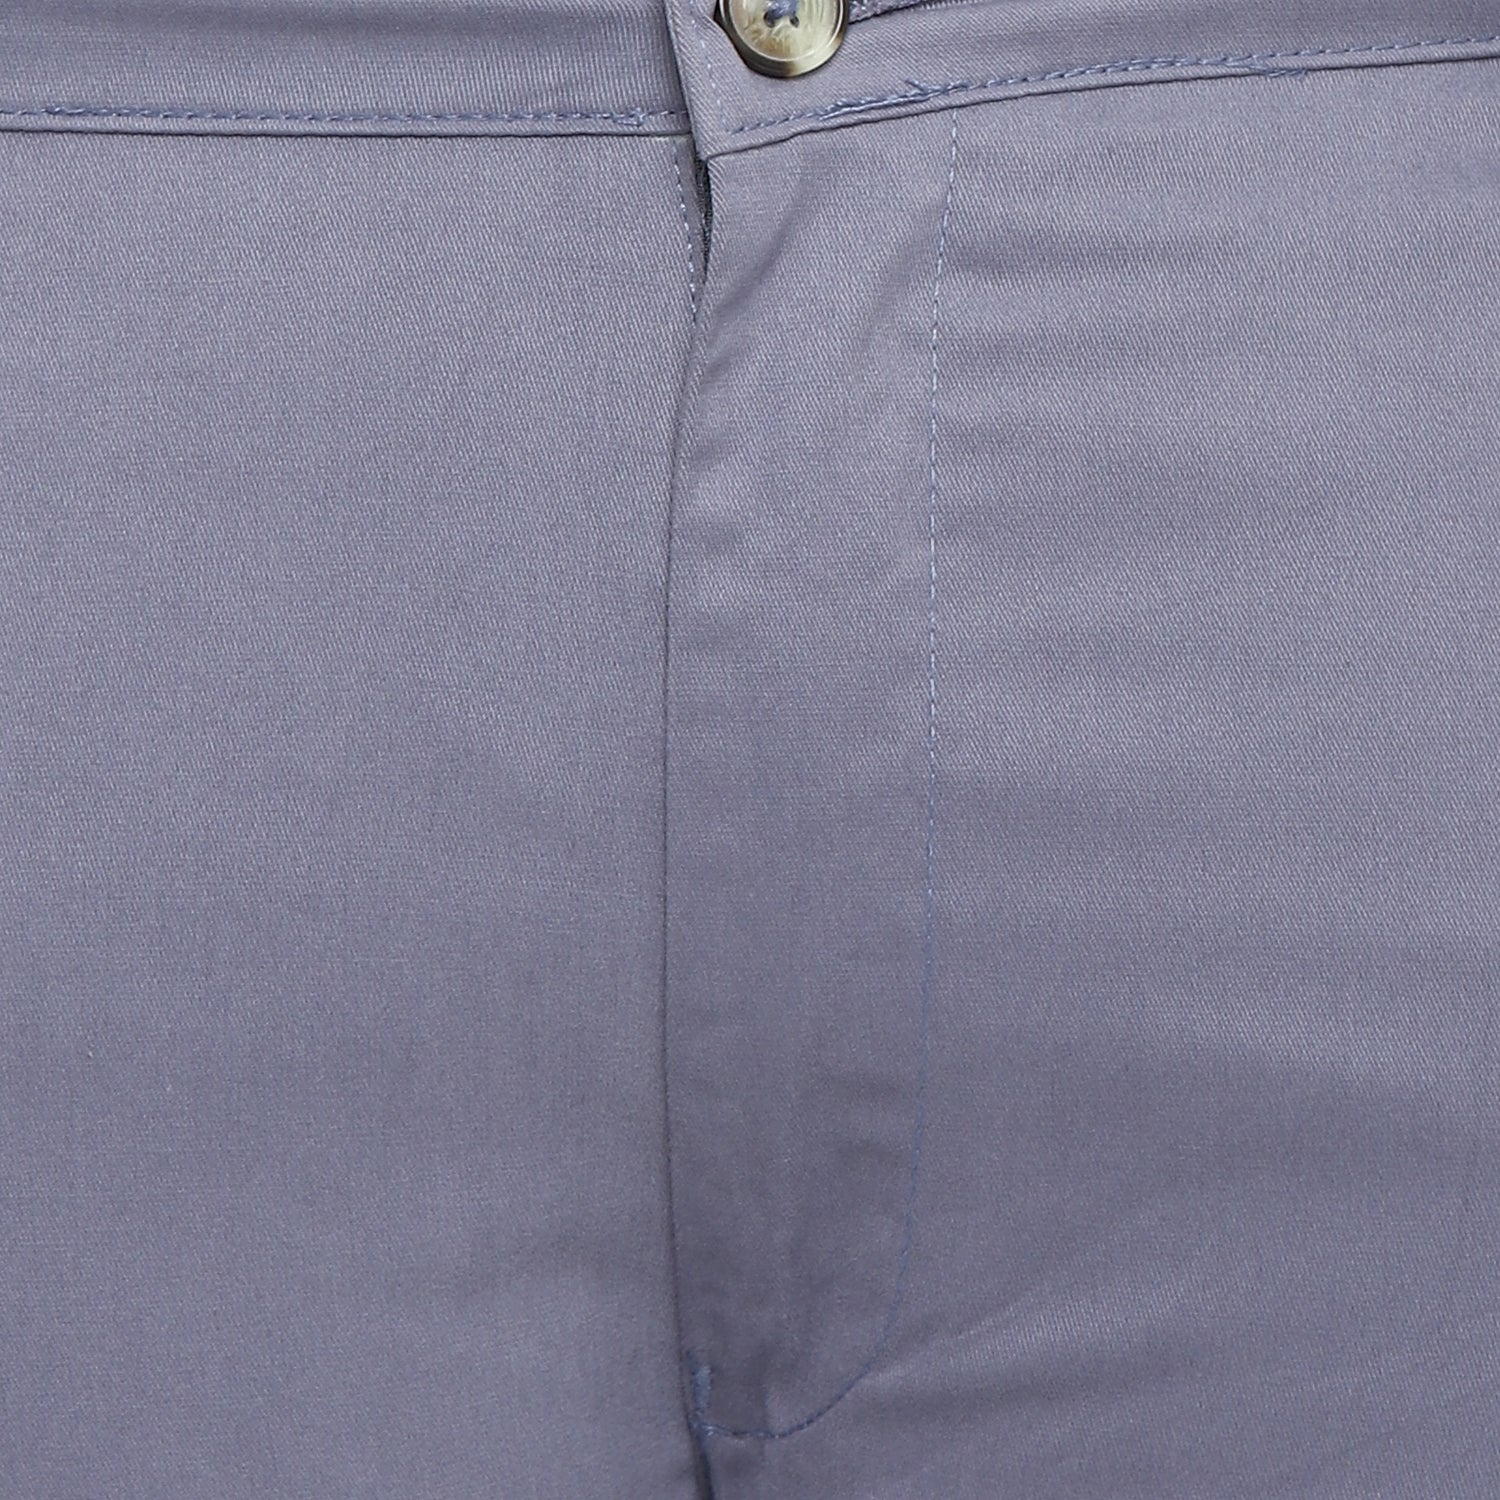 Men's Steel Blue Cotton Regular Fit Casual Chinos Trousers Stretch